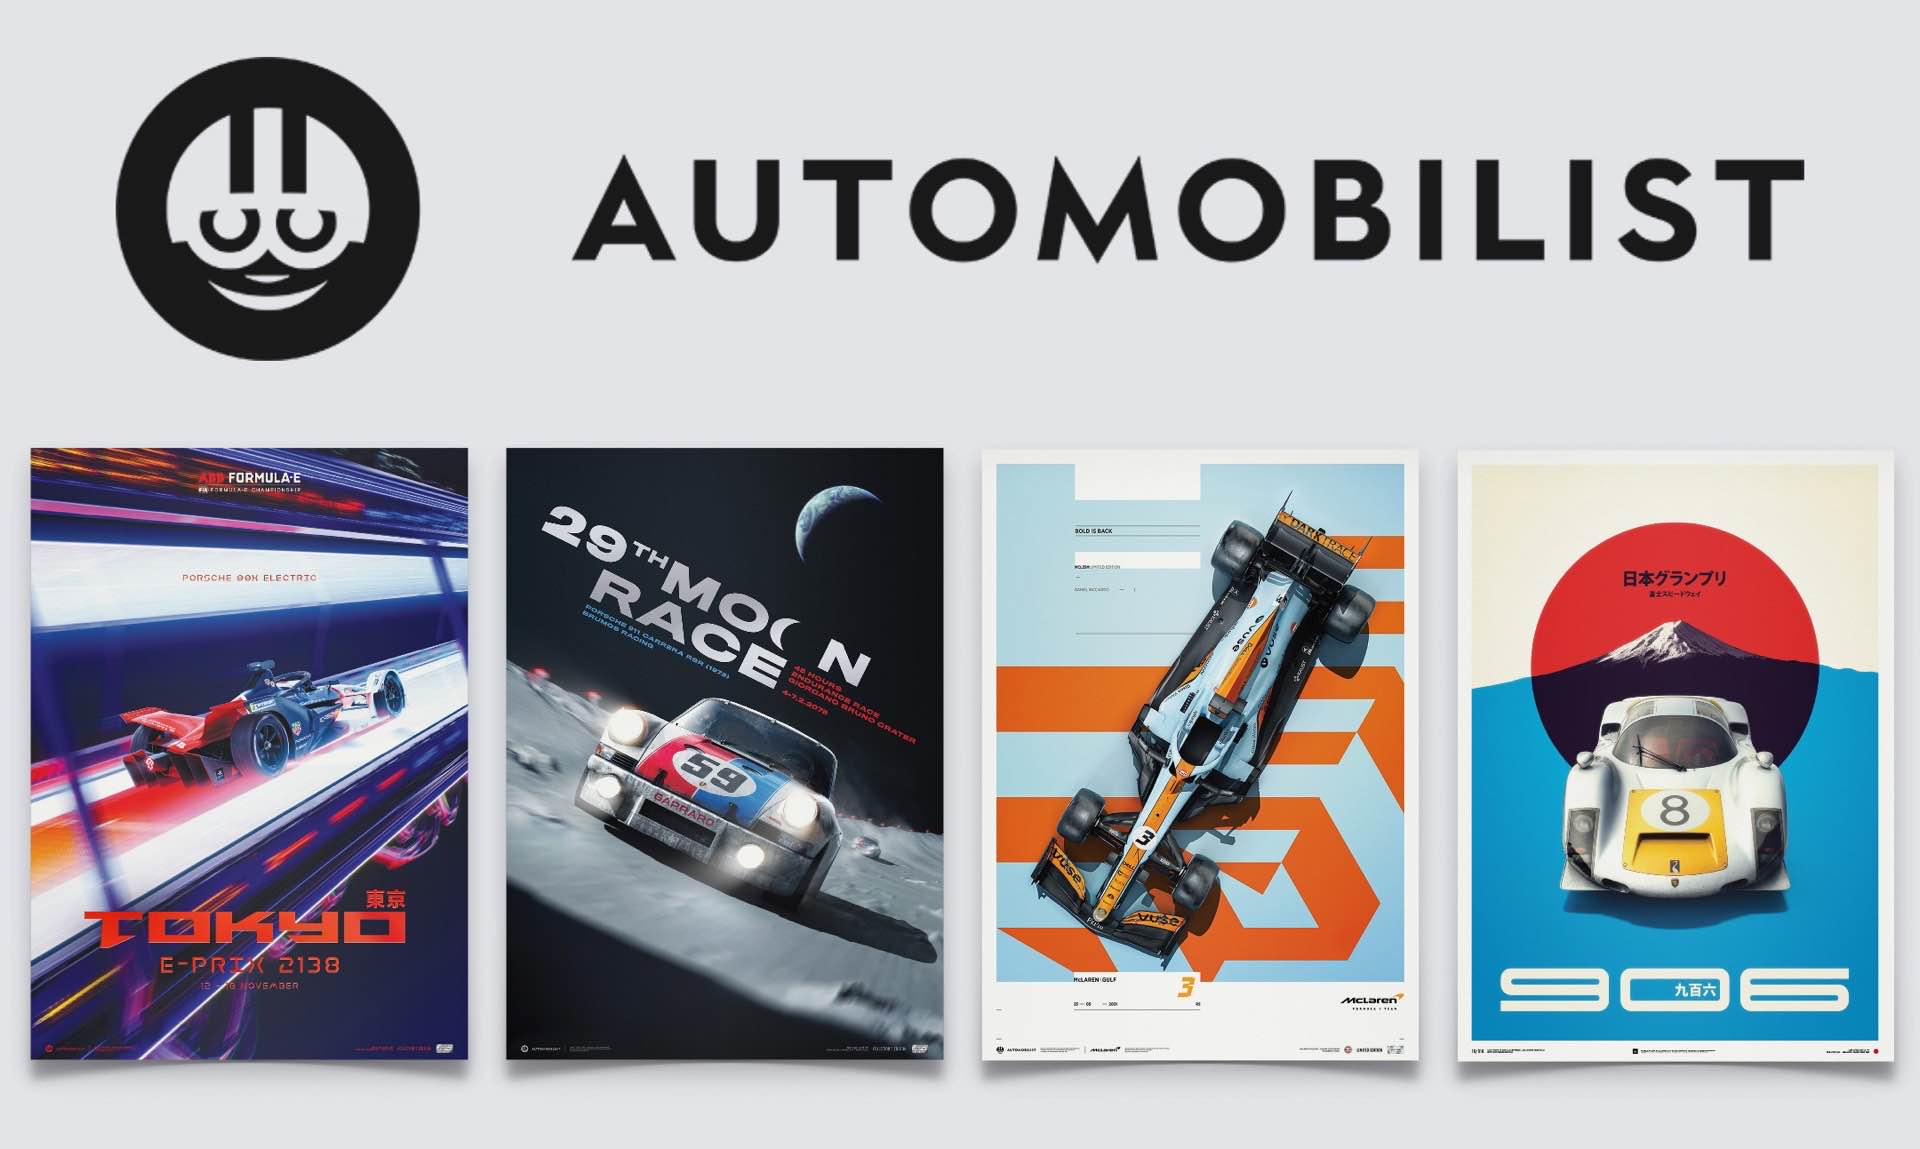 Automobilist motorsport-inspired posters. (Prices vary)